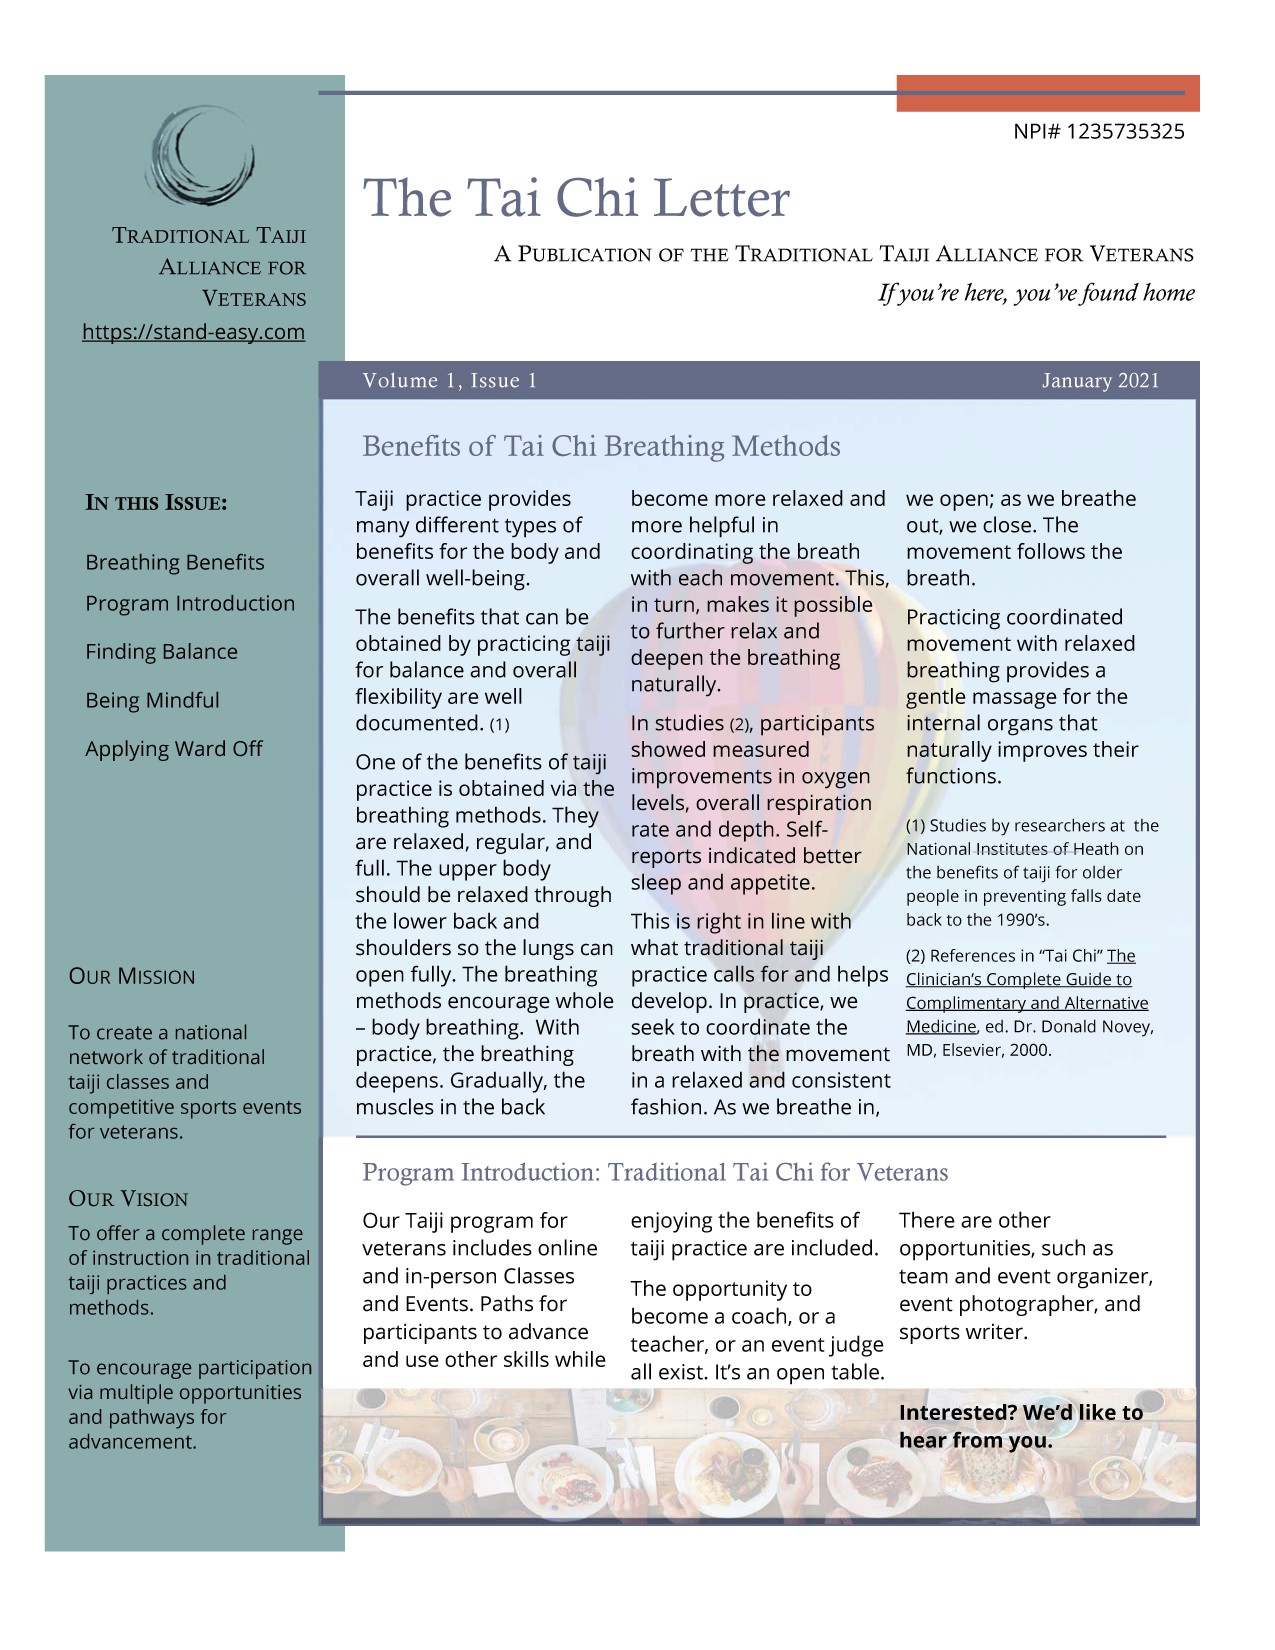 The Tai Chi Letter January 2021